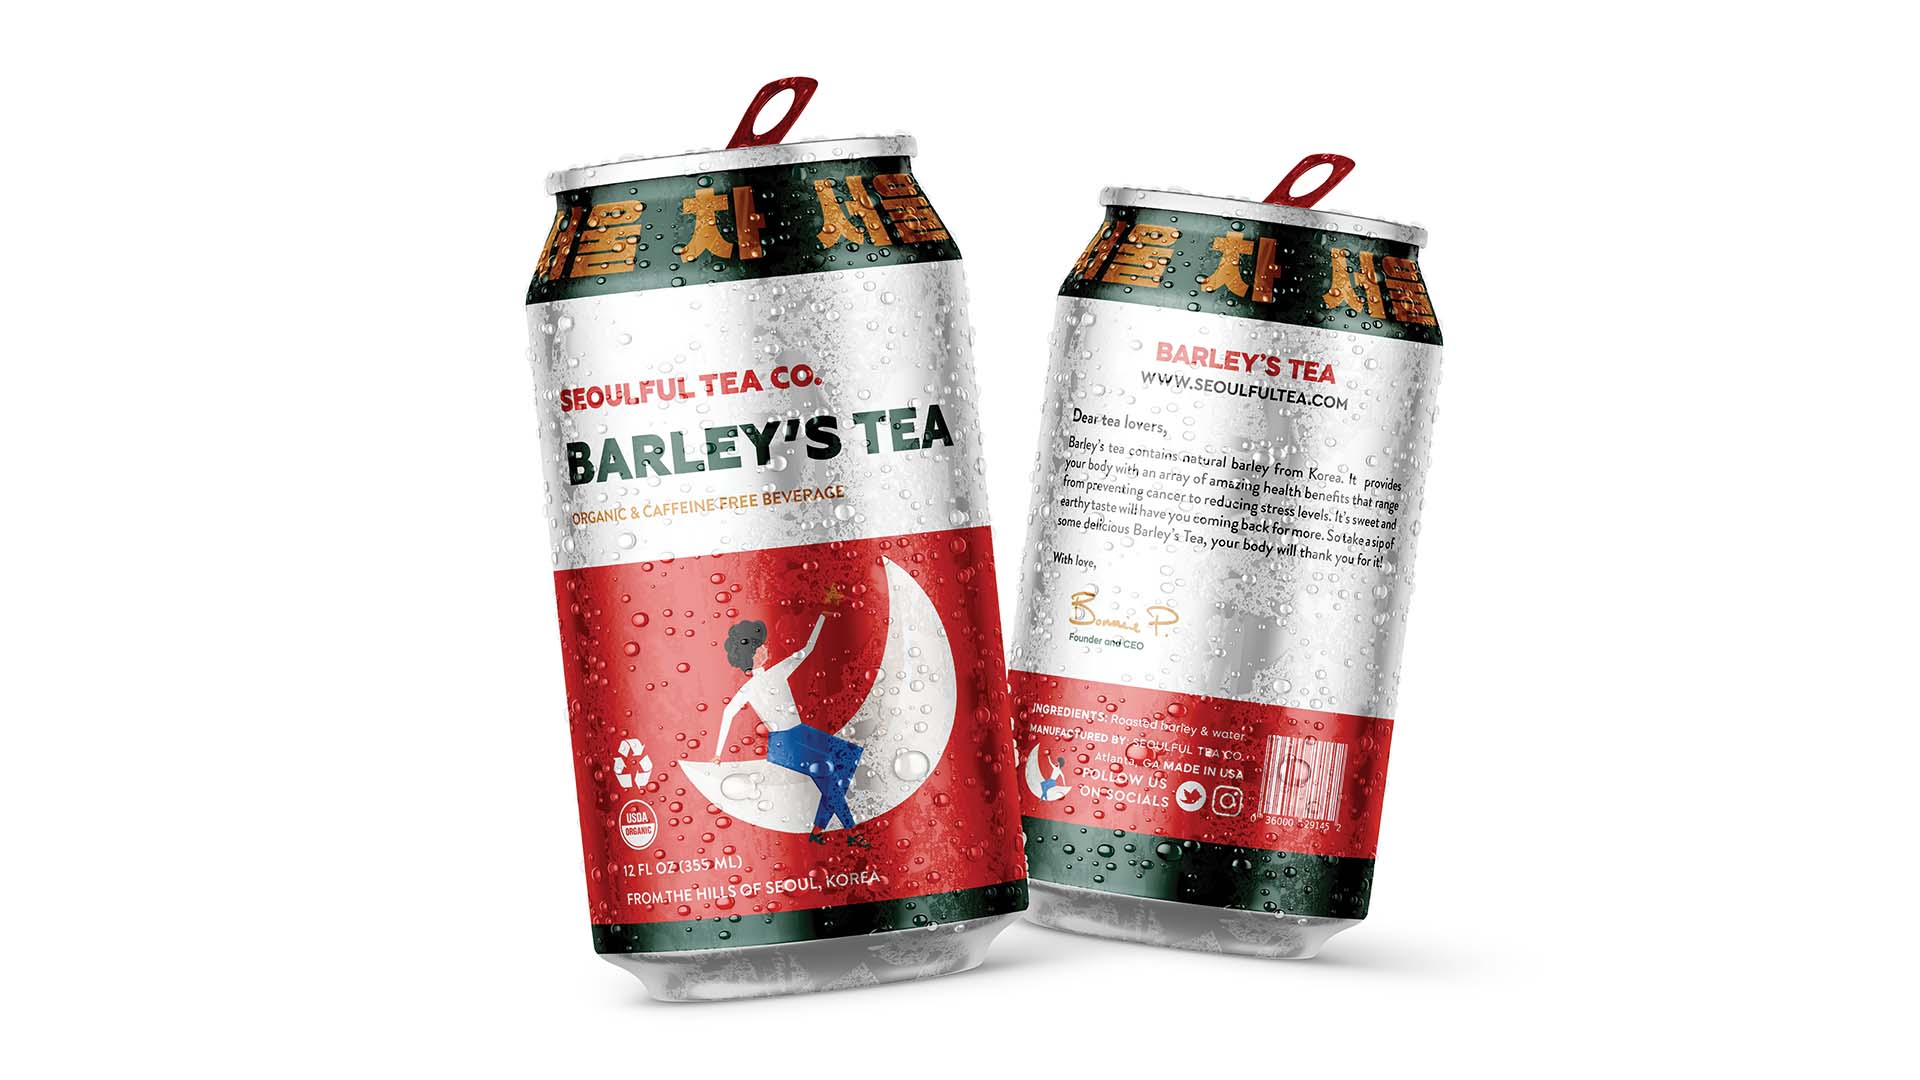  / “Barley's Tea,” product branding and label design, 2021. Barley’s Tea is a barley tea that is intended for all ages and promotes its nutritional value. 